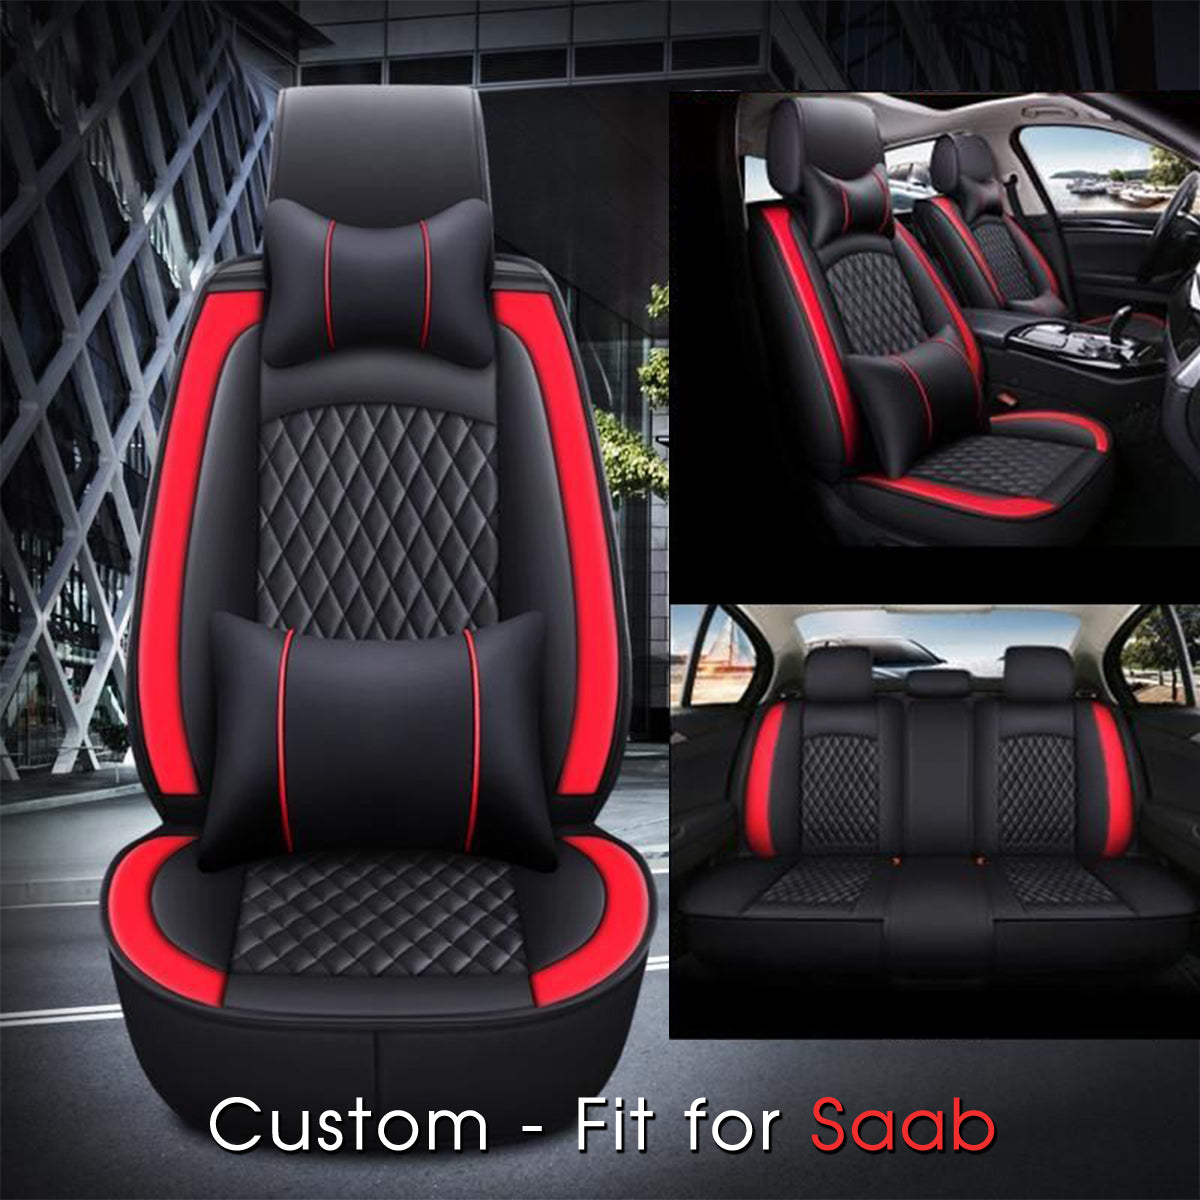 2 Car Seat Covers Full Set, Custom-Fit For Car, Waterproof Leather Front Rear Seat Automotive Protection Cushions, Car Accessories DLSU211